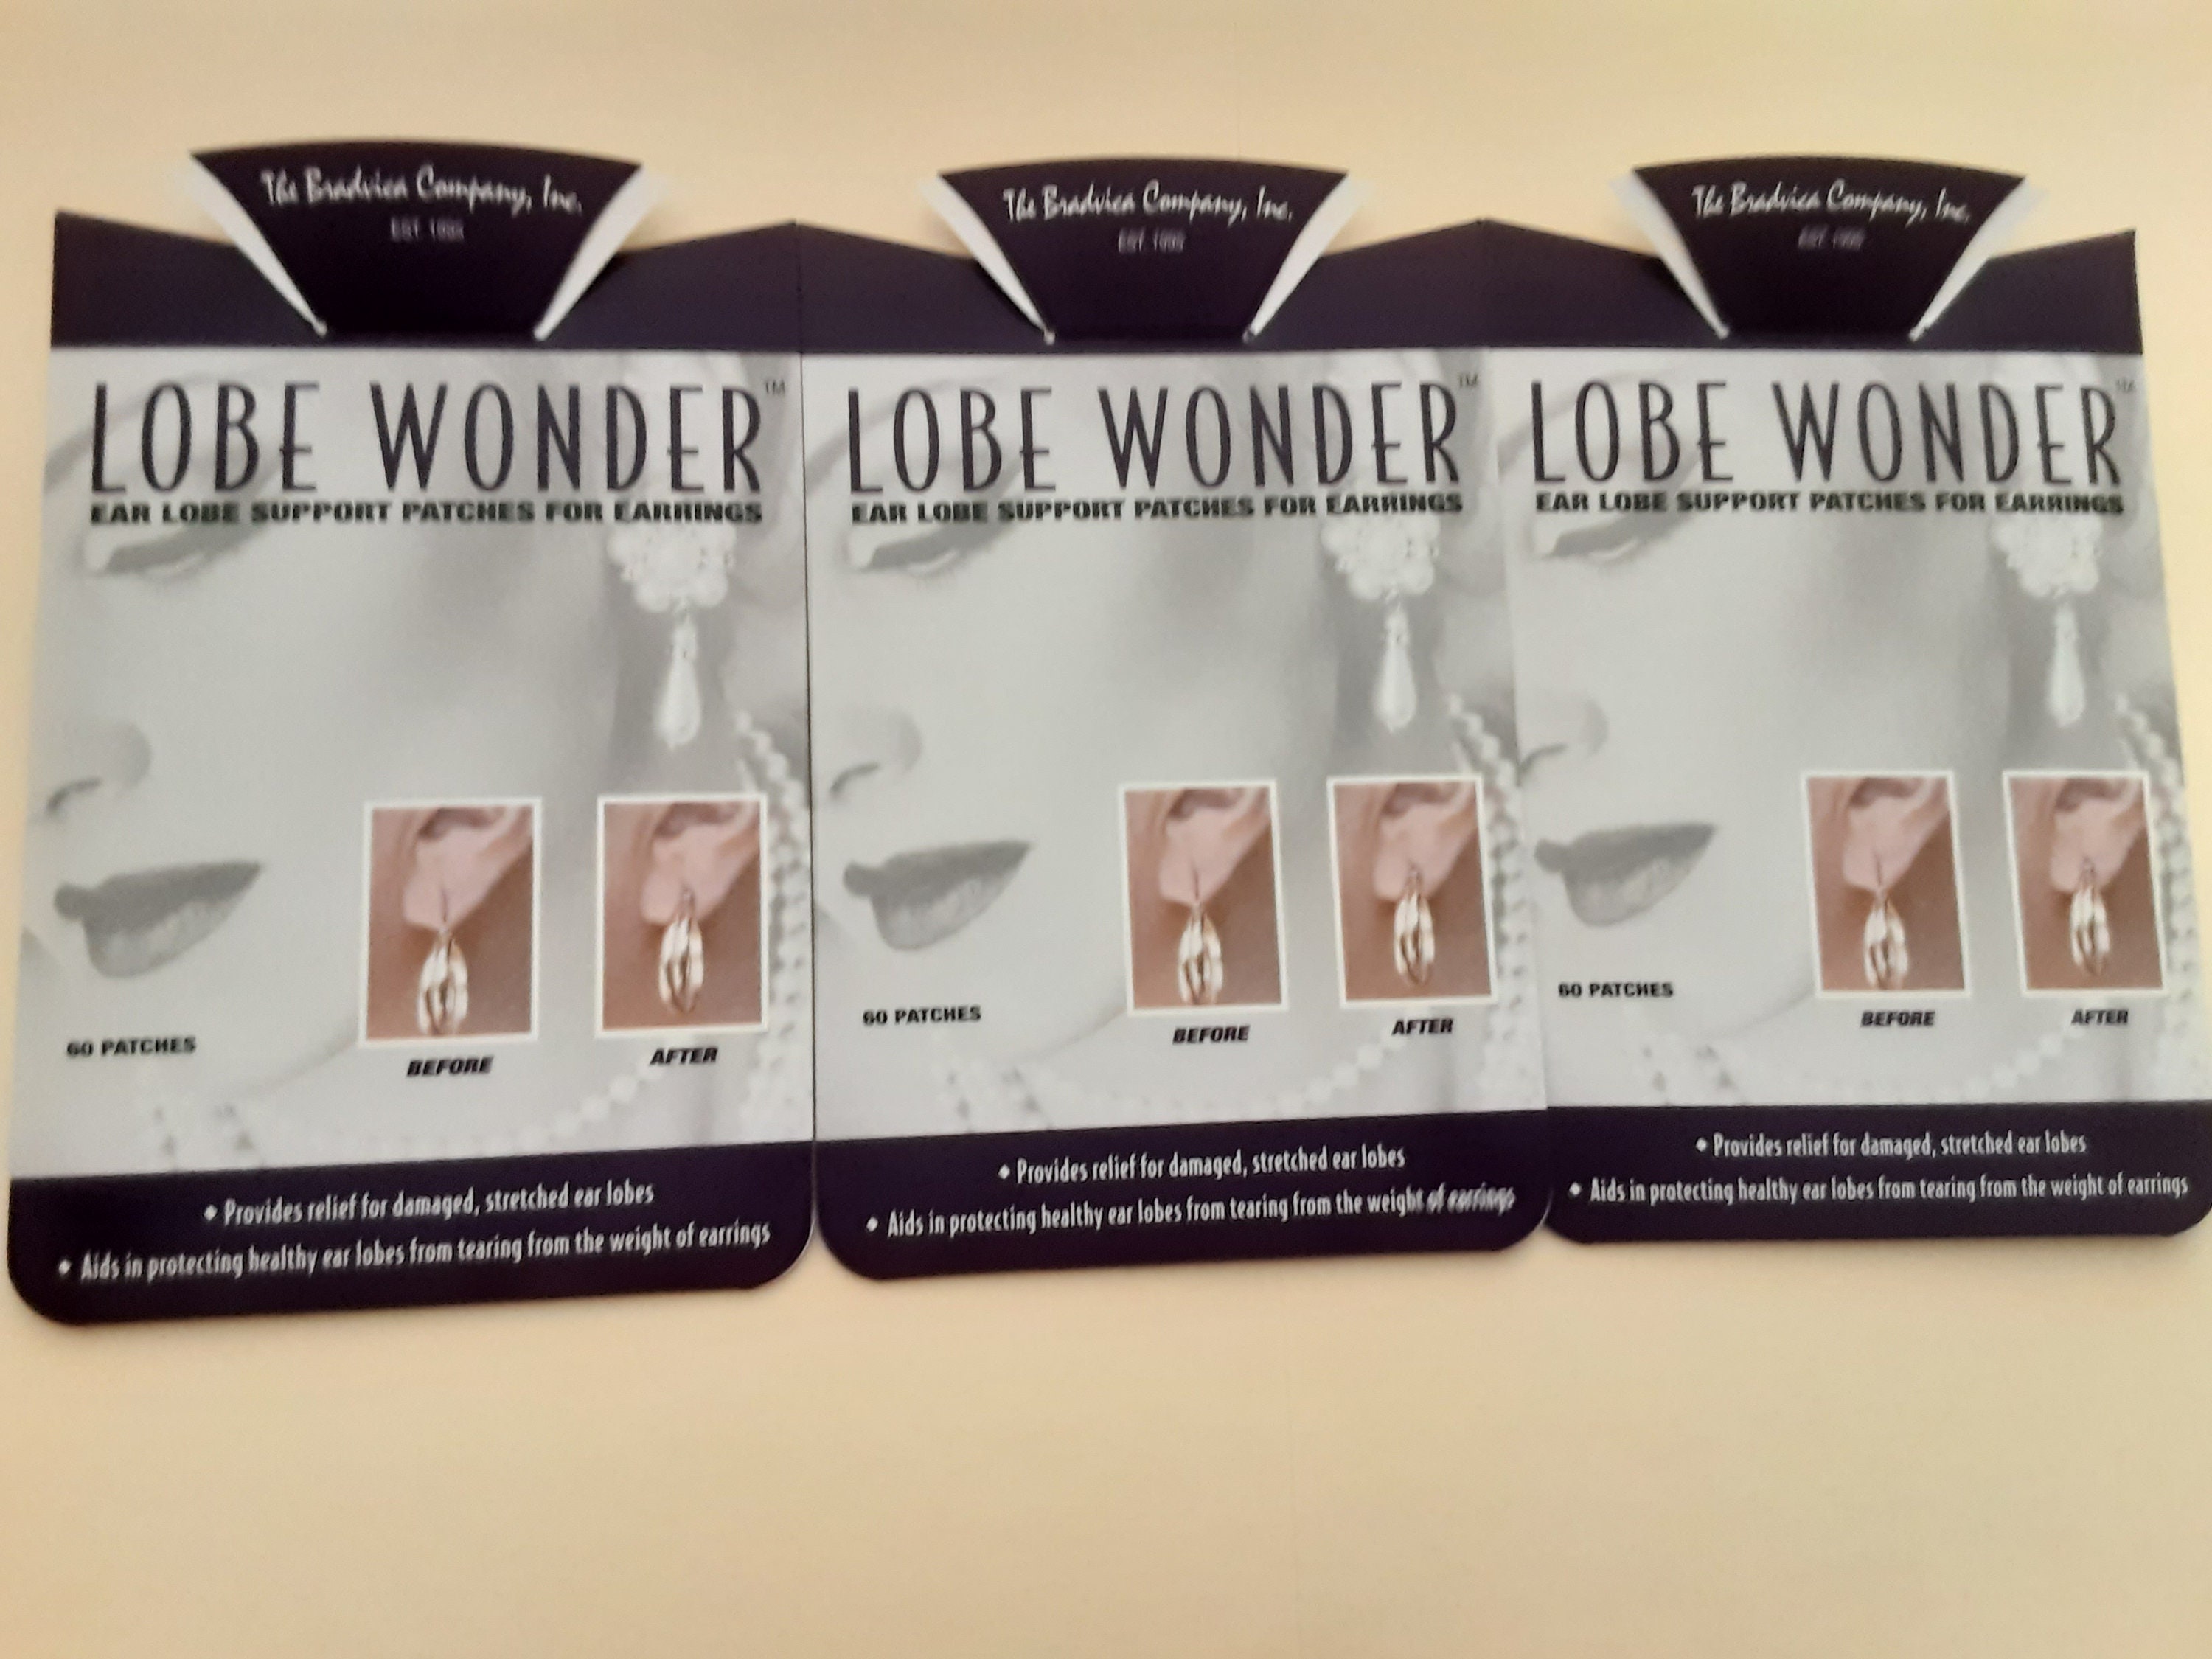 Lobe Wonder Earring Support Patches